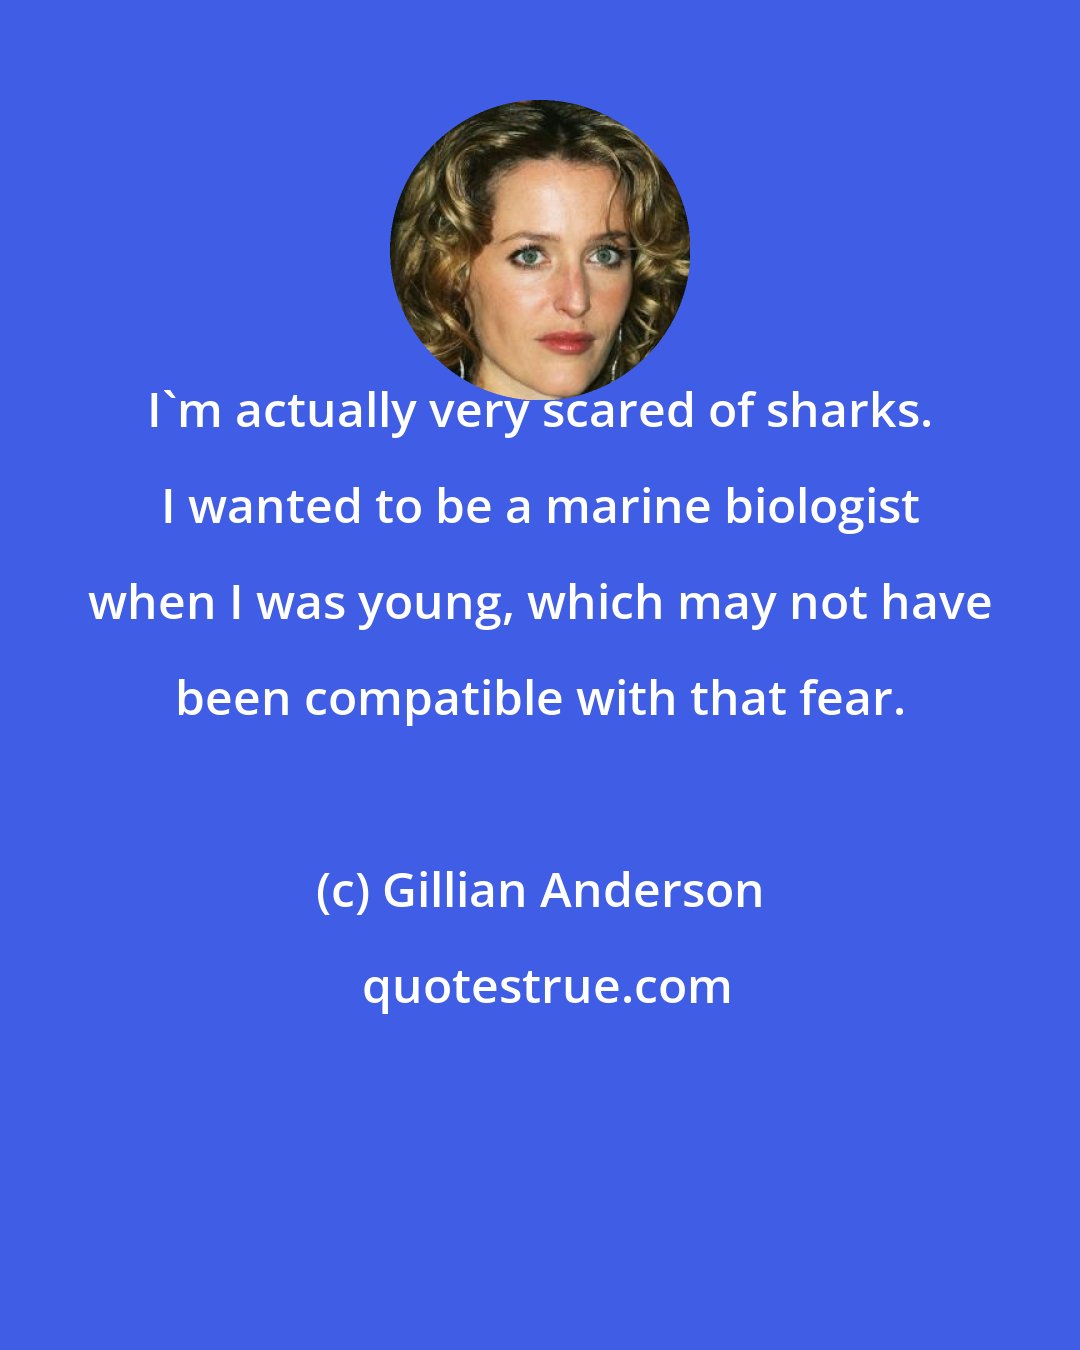 Gillian Anderson: I'm actually very scared of sharks. I wanted to be a marine biologist when I was young, which may not have been compatible with that fear.